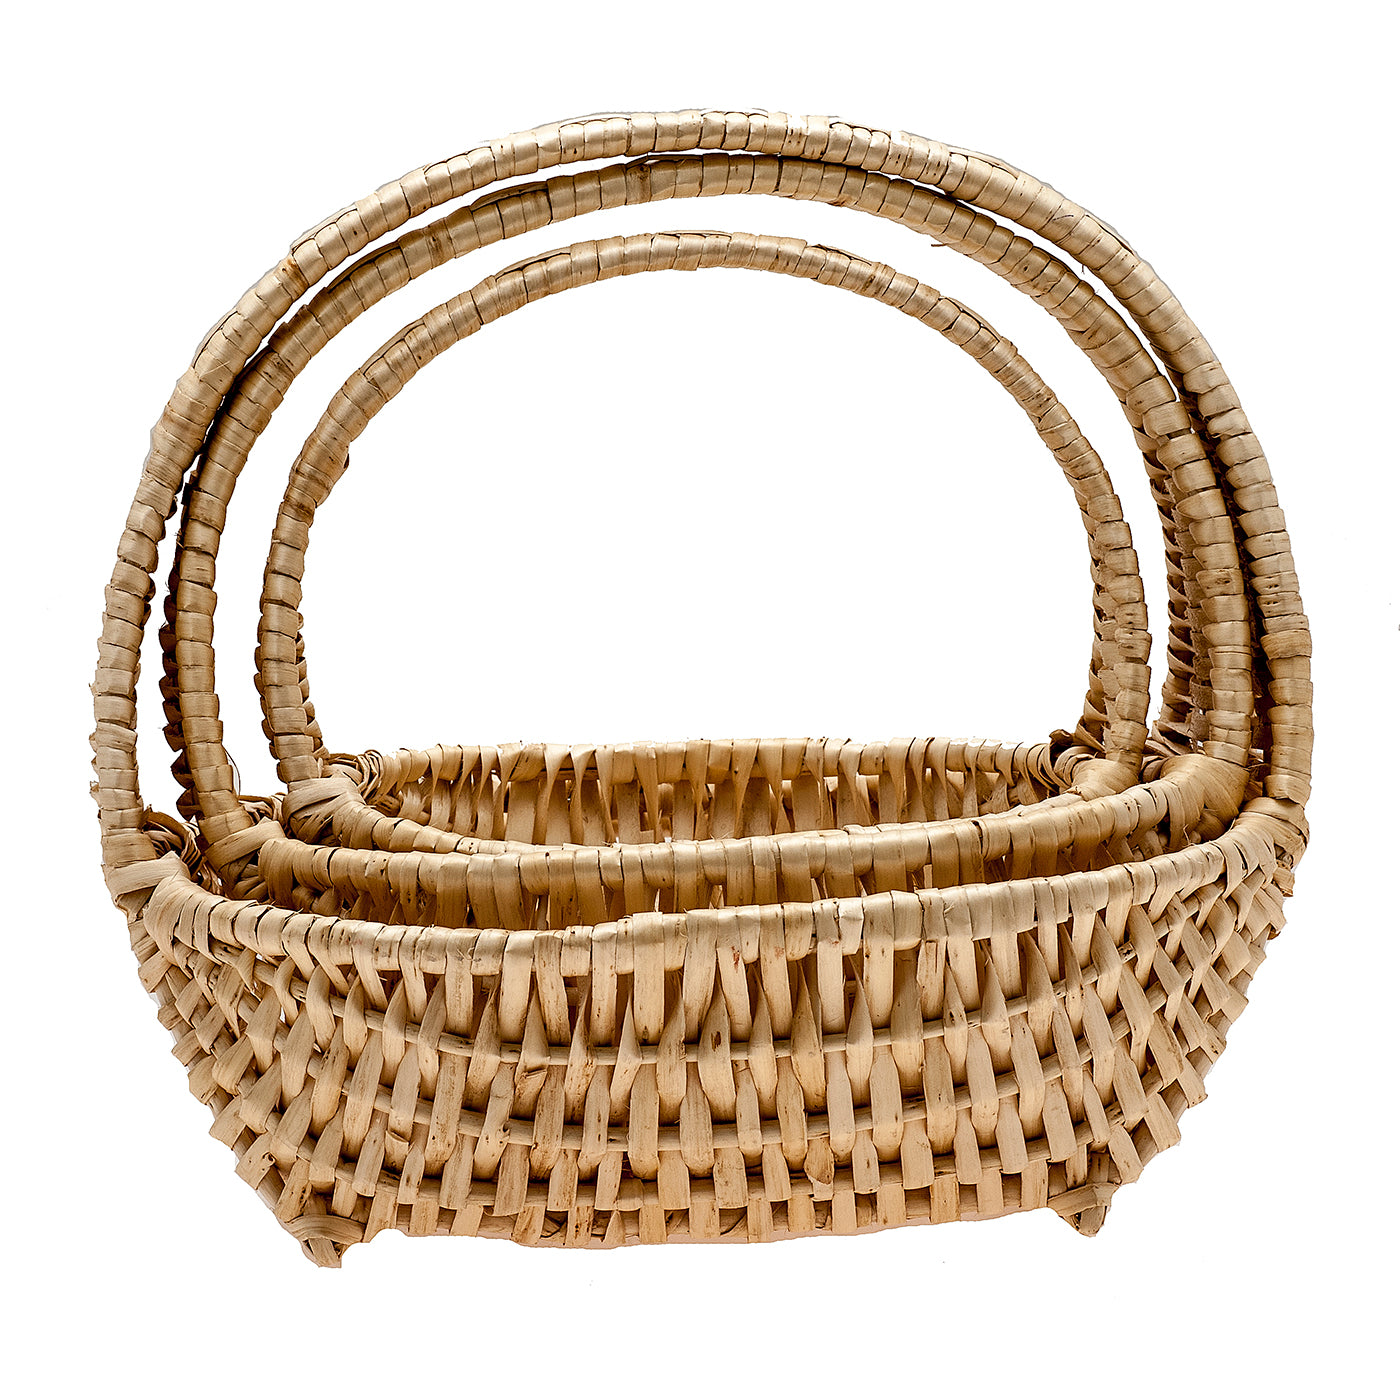 Set of 3 - Oval Split Willow Baskets - 14.17 - 12 -10.5 inch - EXTRA LARGE 14.17 x 11.81 x 5.51 x 14 HANDLE LARGE 12 x 10 x 4.5 x 12 HANDLE MEDIUM 10.5x 8.5 x 4 x 10 HANDLE